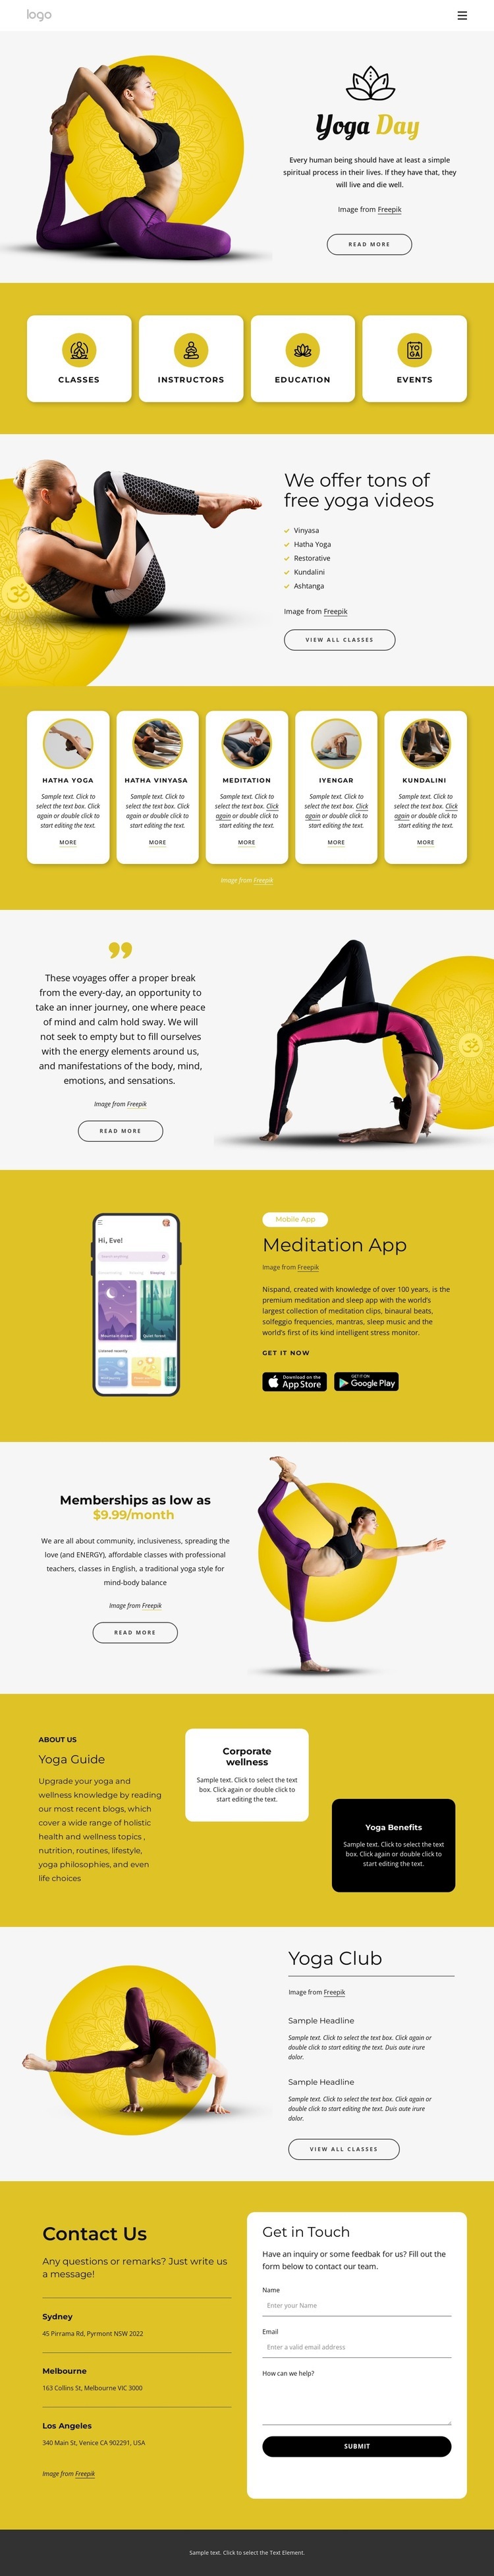 Yoga events and classes Wix Template Alternative